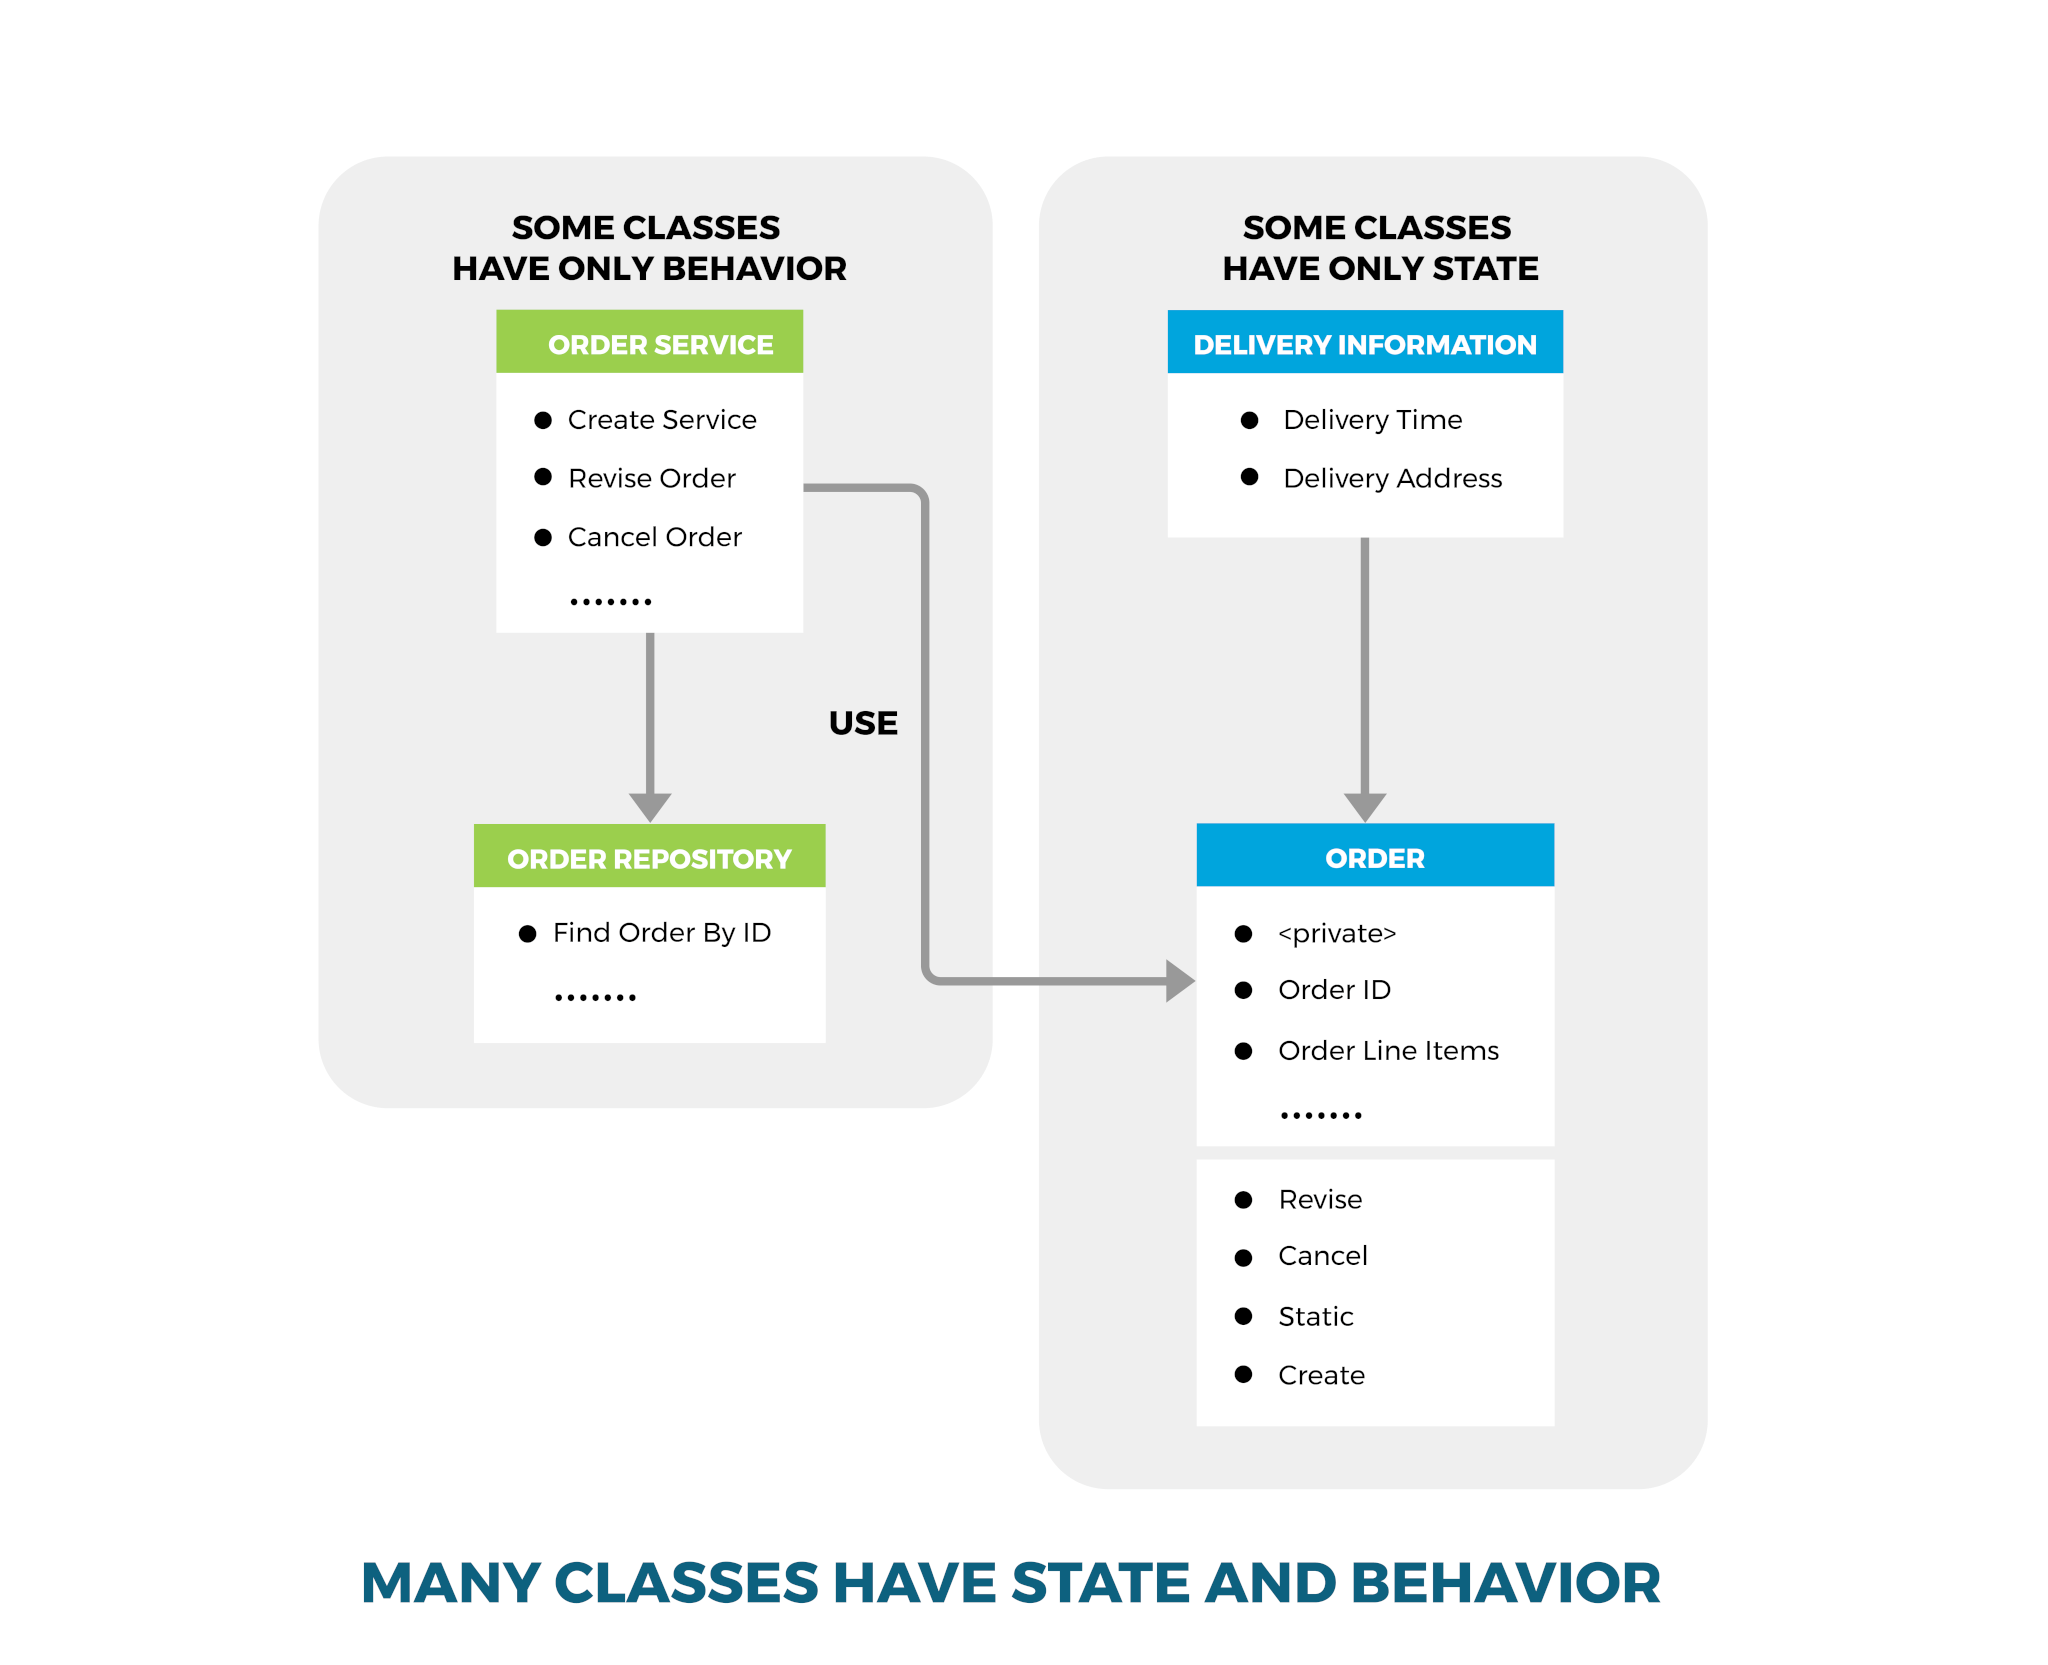 This illustration shows microservices business logic in domain-driven design. The image is divided into two sections. On the left, under the label “some classes have only behavior” you see the sections “Order Service” which includes “create service,” “revise order,” and “cancel order.” Below this section is “Order Repository” which includes “find order by ID.” An arrow connects the two. The right side is labeled “Some Classes Have Only State.” The first section on this side is called “Delivery Information” and includes “delivery time” and “delivery address.” An arrows points down to the next sections called “Order.” This section includes “,” “Order ID,” “Order Line Items,” “Revise,” “Cancel”, “Static,” and “Create”. An arrow connects this section to “Order Service” on the left. At the bottom, the image reads Many classes have state and behavior.”